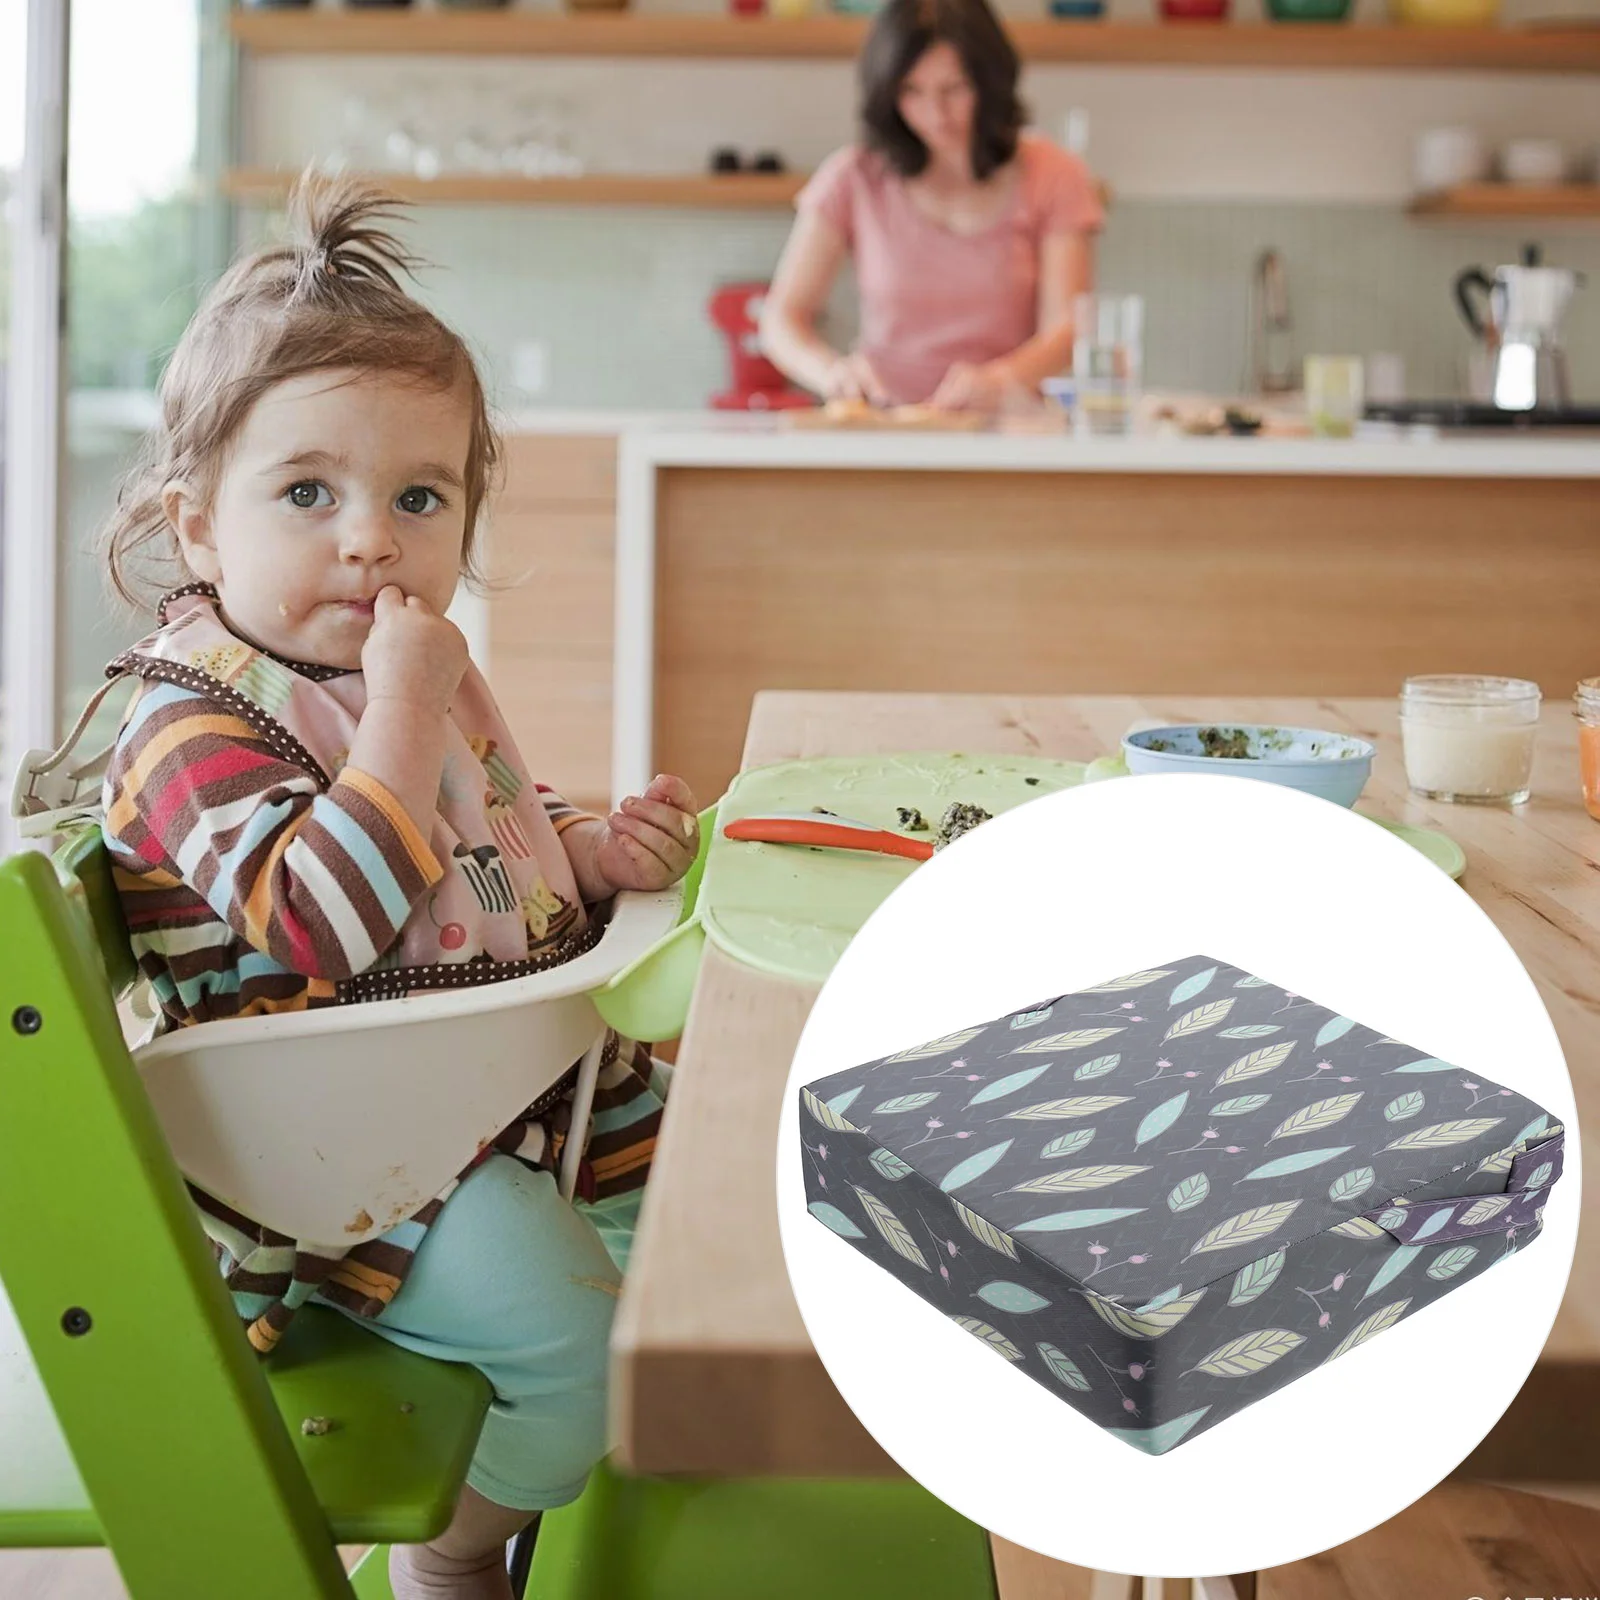 

Dining Chair Booster Cushion Baby Seat Pad Kids Placemats Table Toddler Highchair Waterproof Polyester Material Child Eating